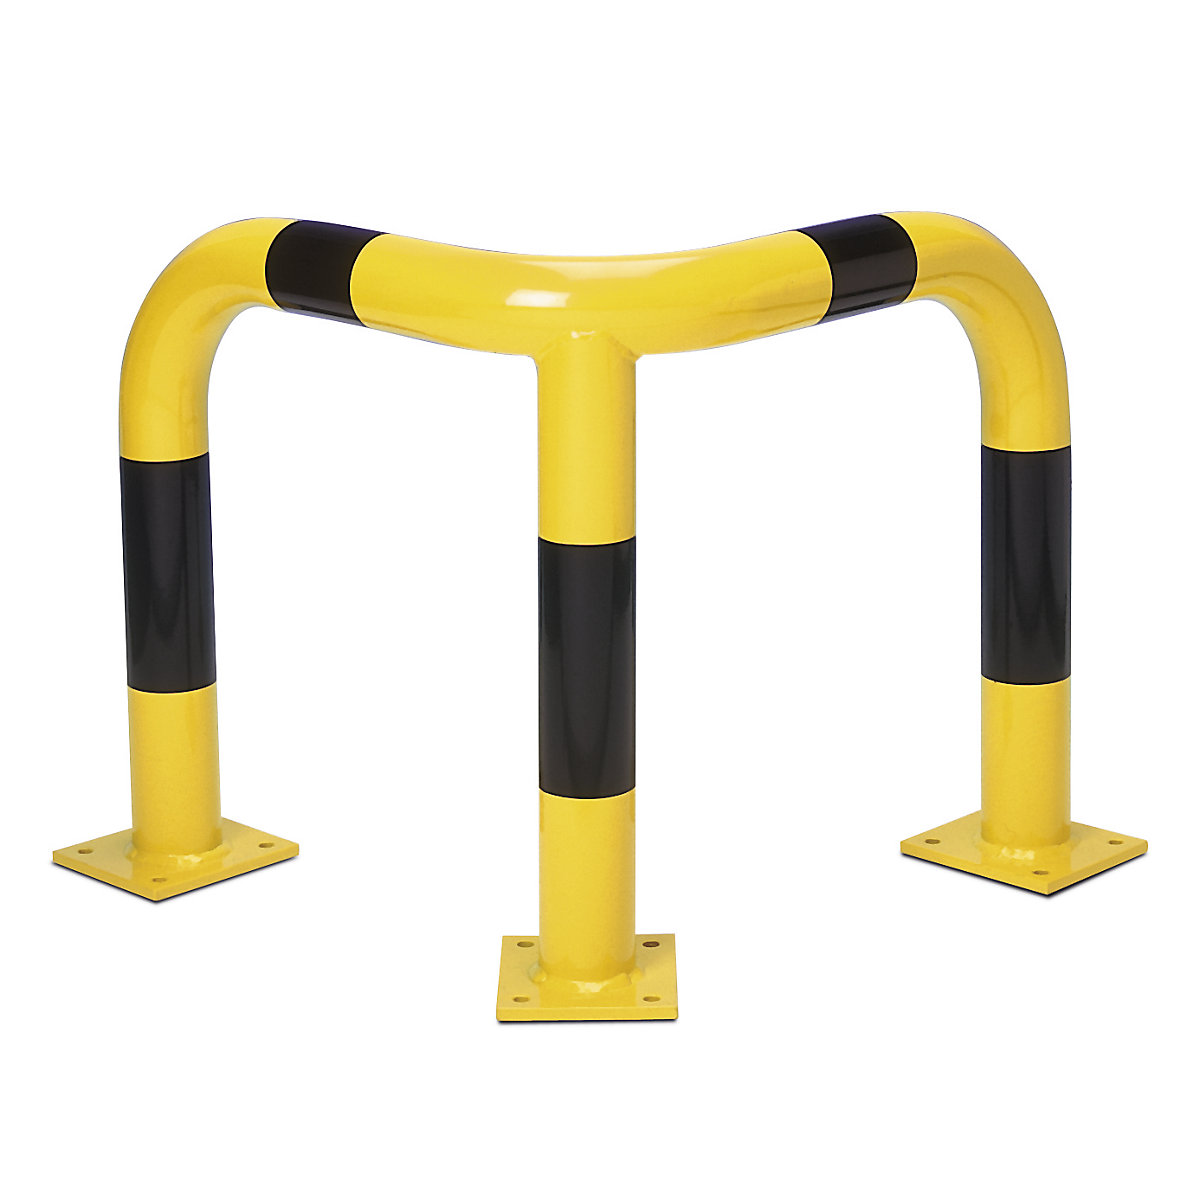 Crash protection corner, Ø 76 mm, for outdoor use, height 600 mm, yellow/black